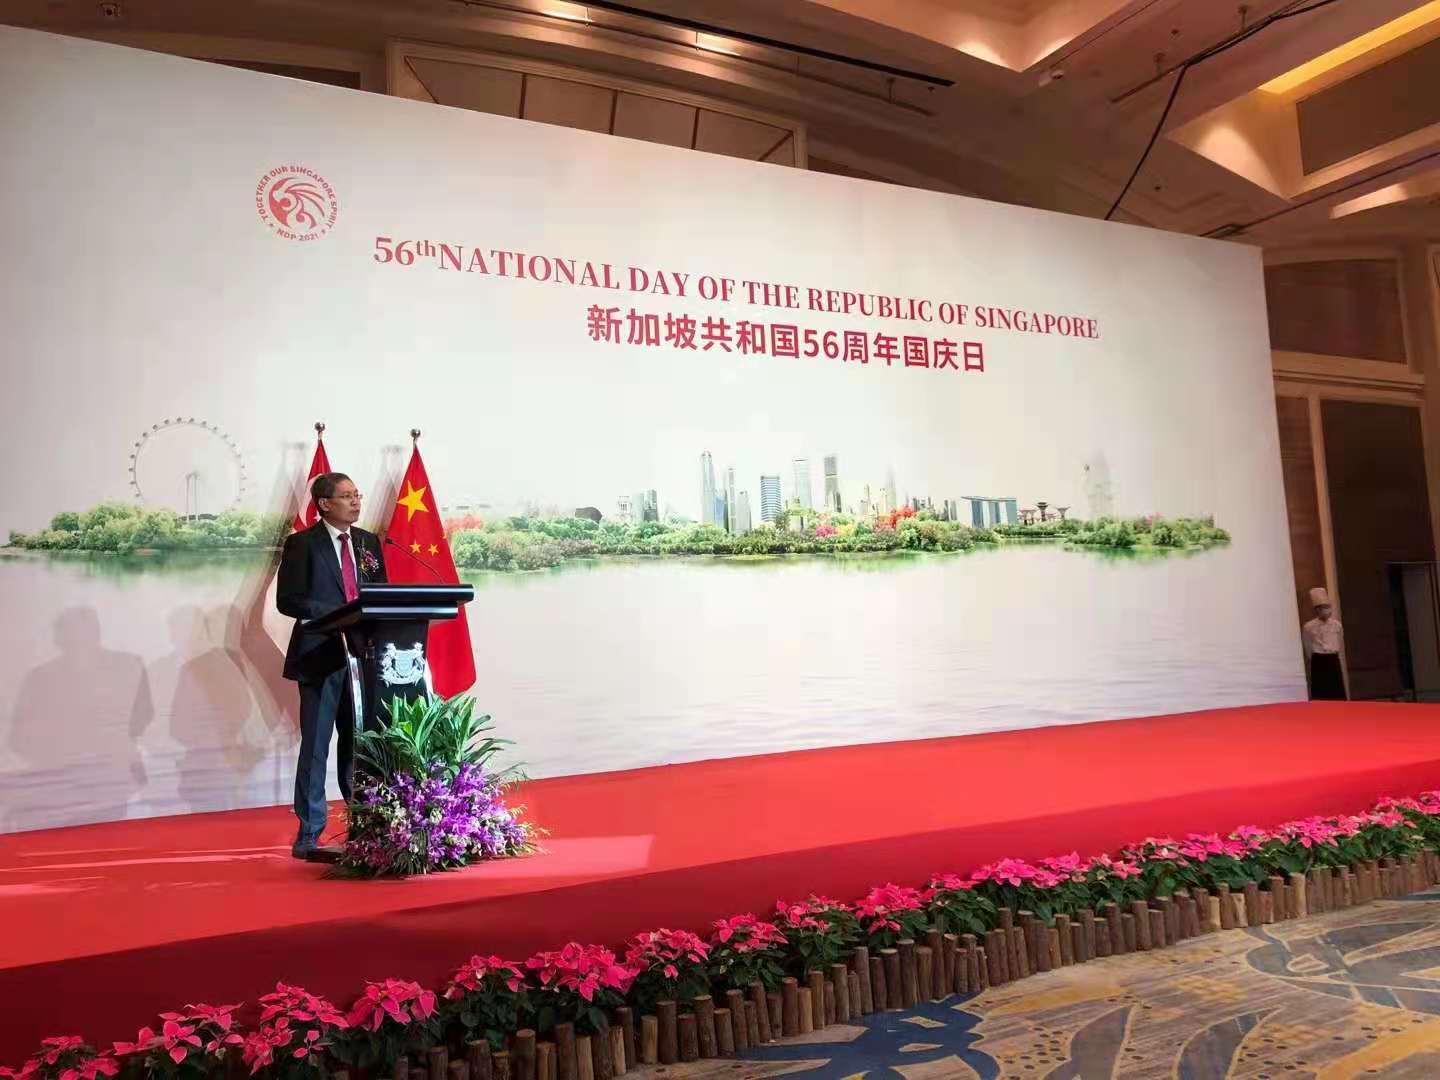 Mr.Xu attended the Singapore National Day reception